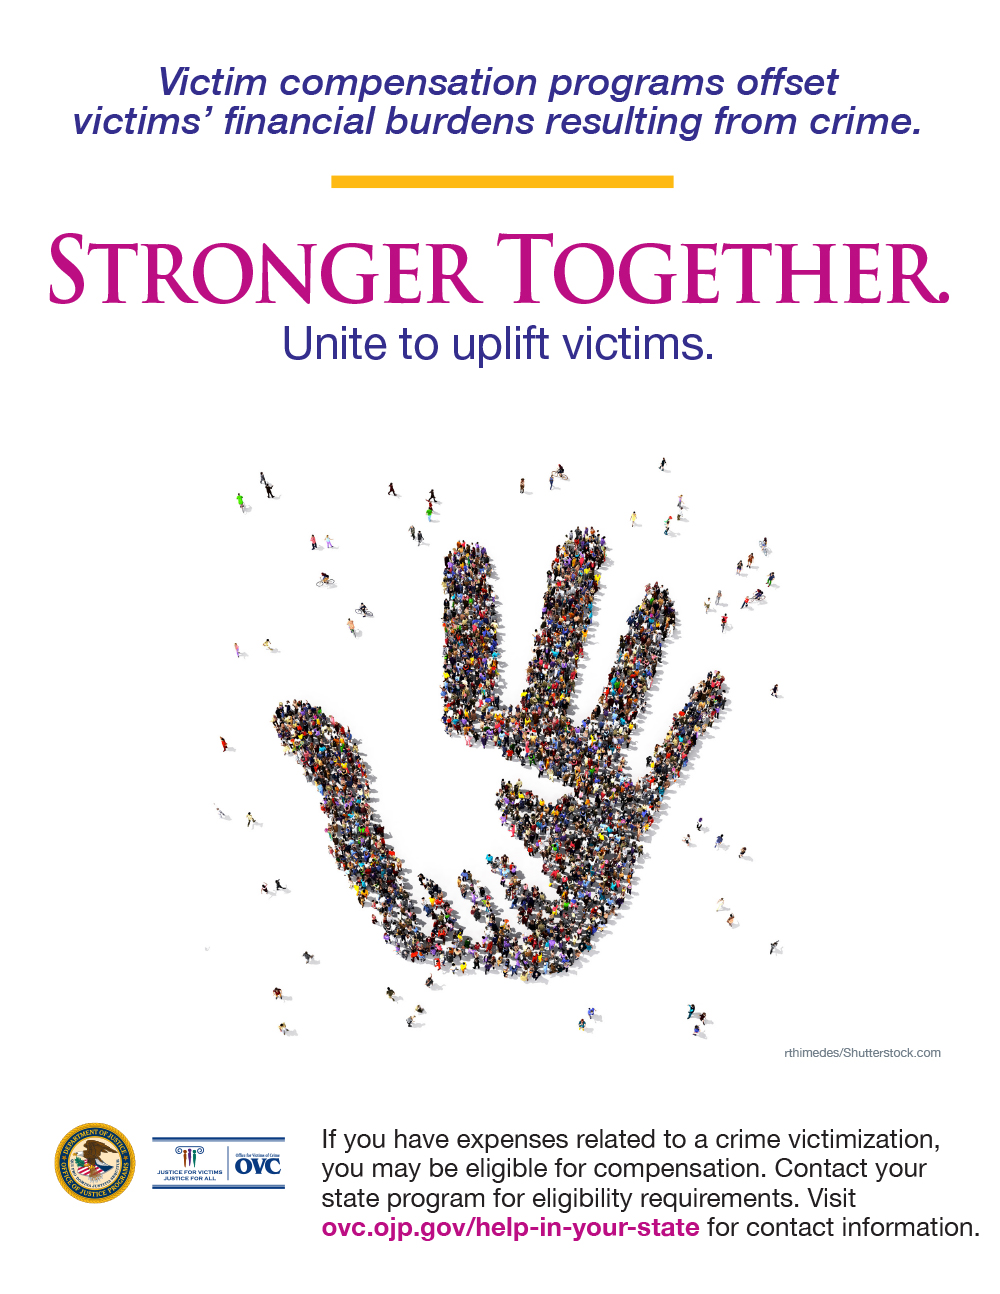 2021 National Crime Victims' Rights Week Resource Guide: Victim Compensation Poster